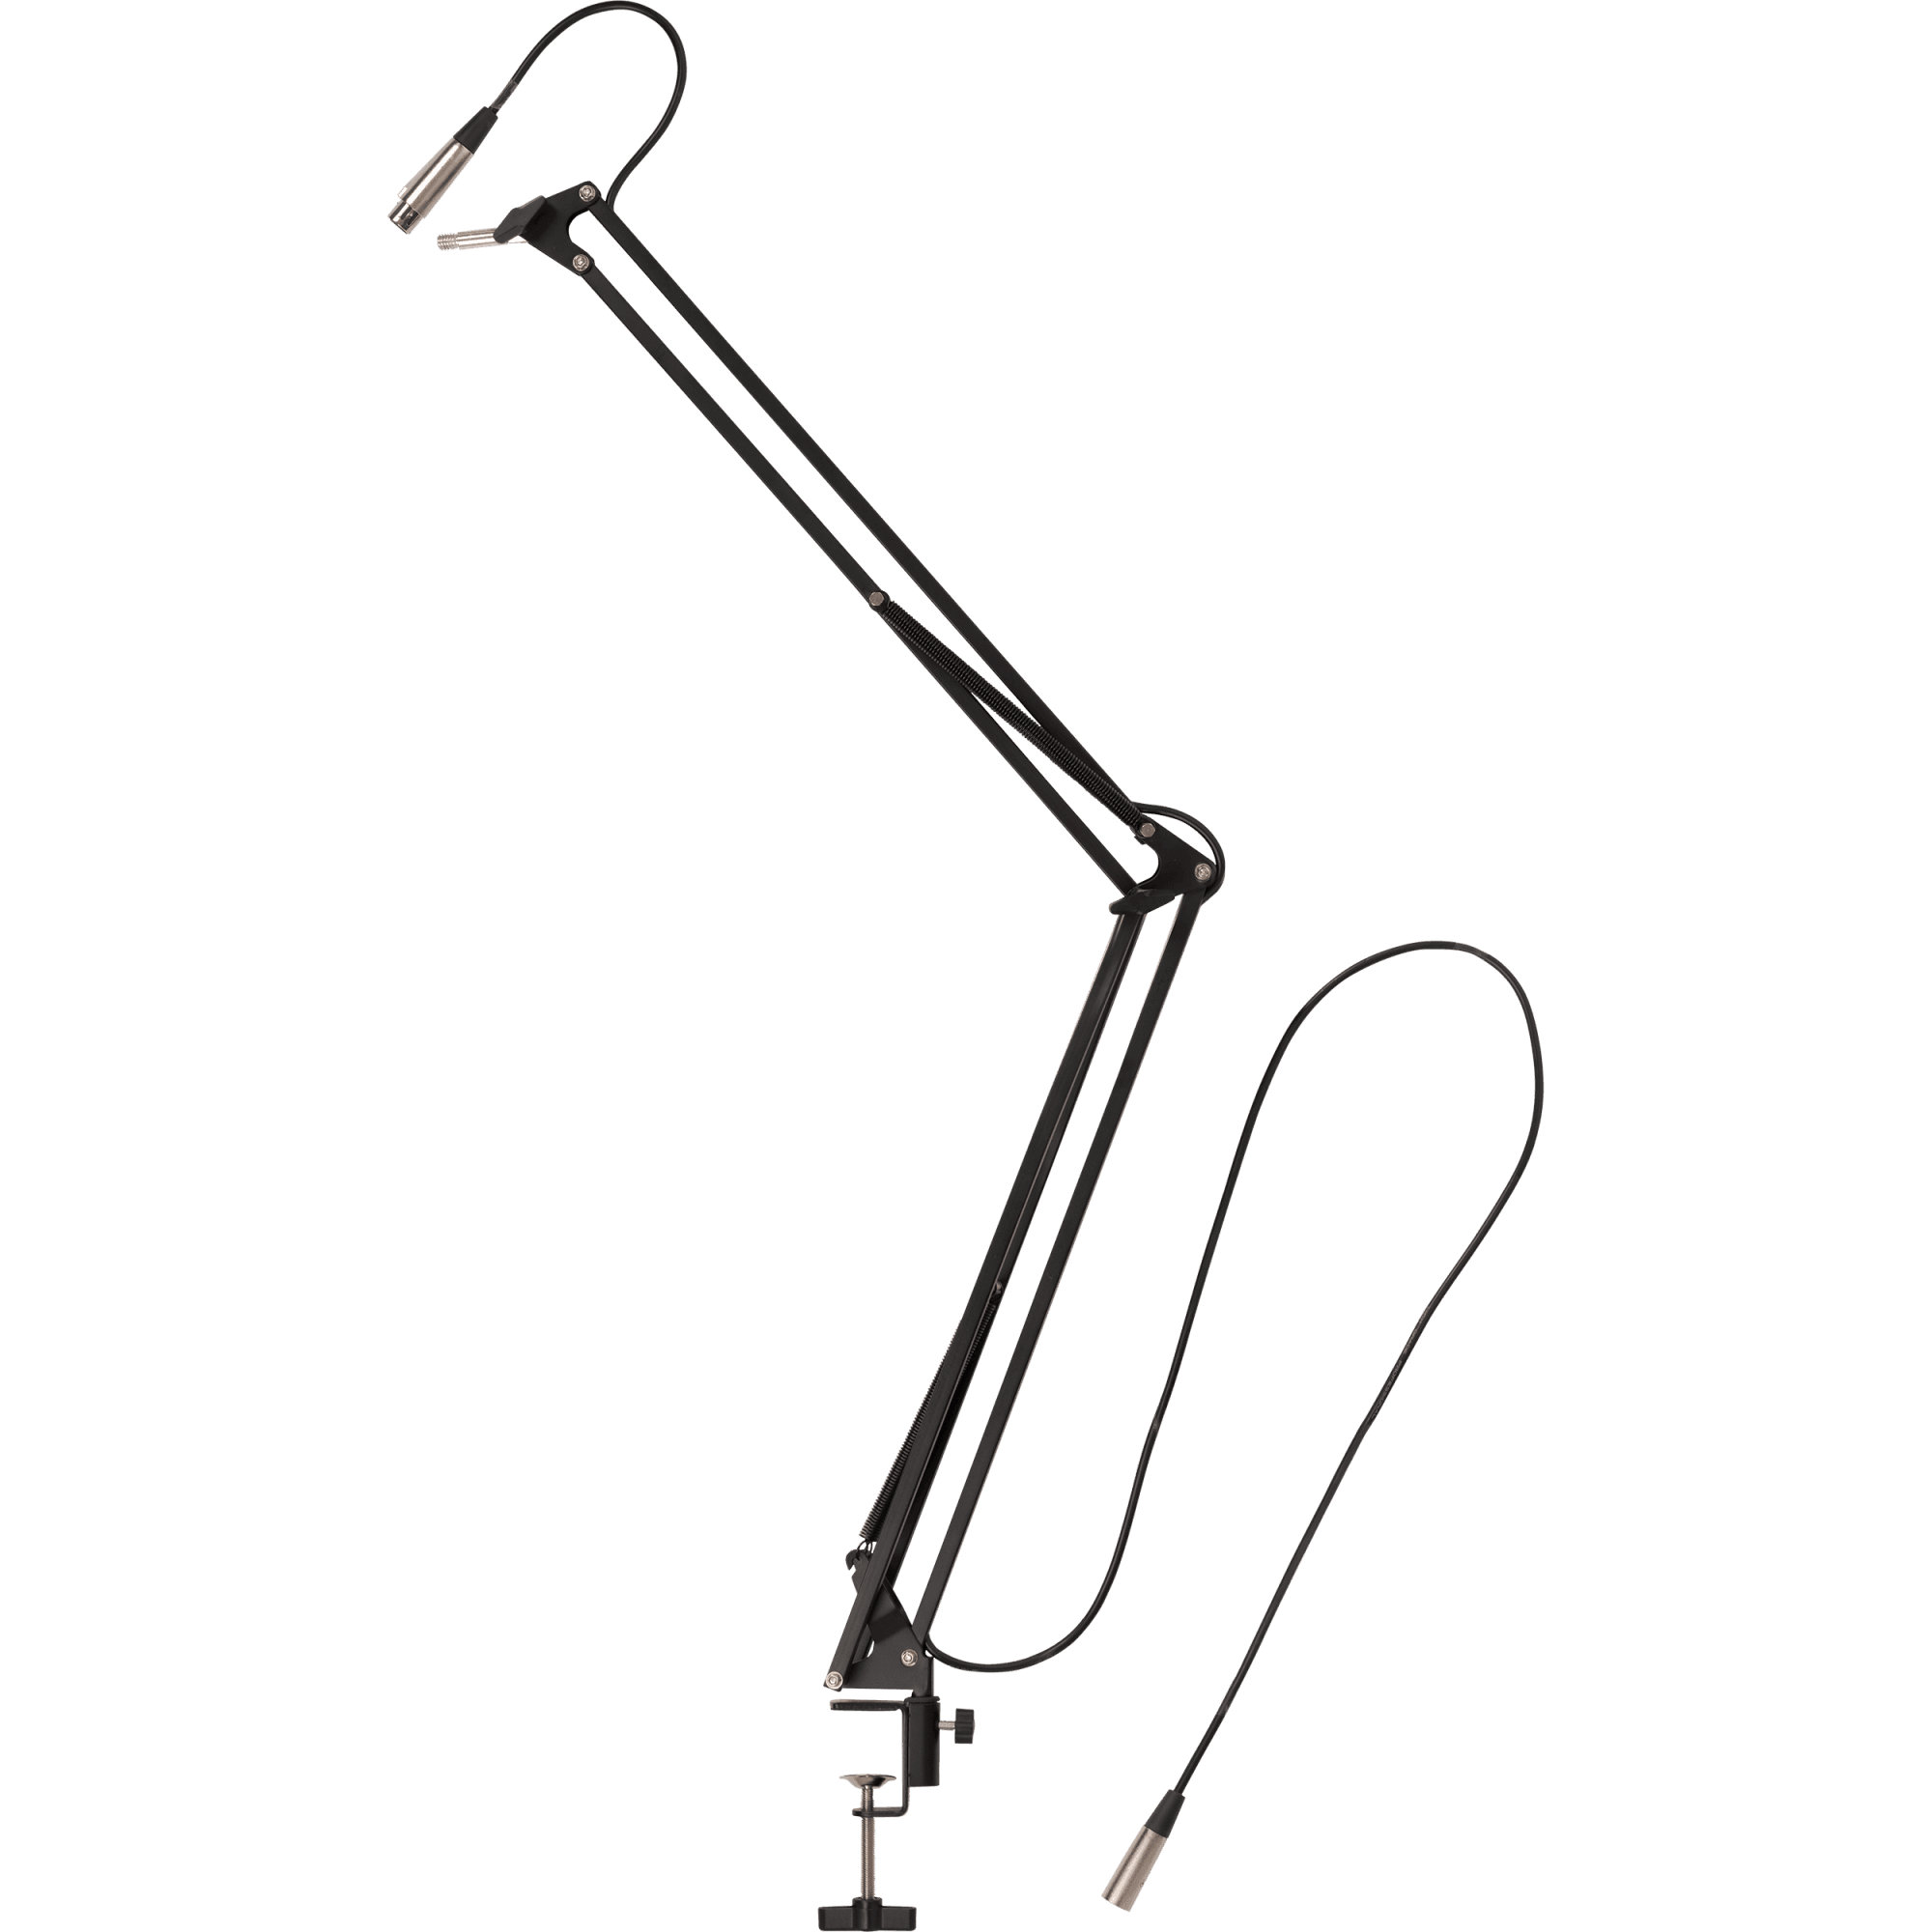 Xtreme Desk Mount Microphone Boom Arm w/ XLR Cable - Live & Recording - Microphones - Accessories by Xtreme at Muso's Stuff